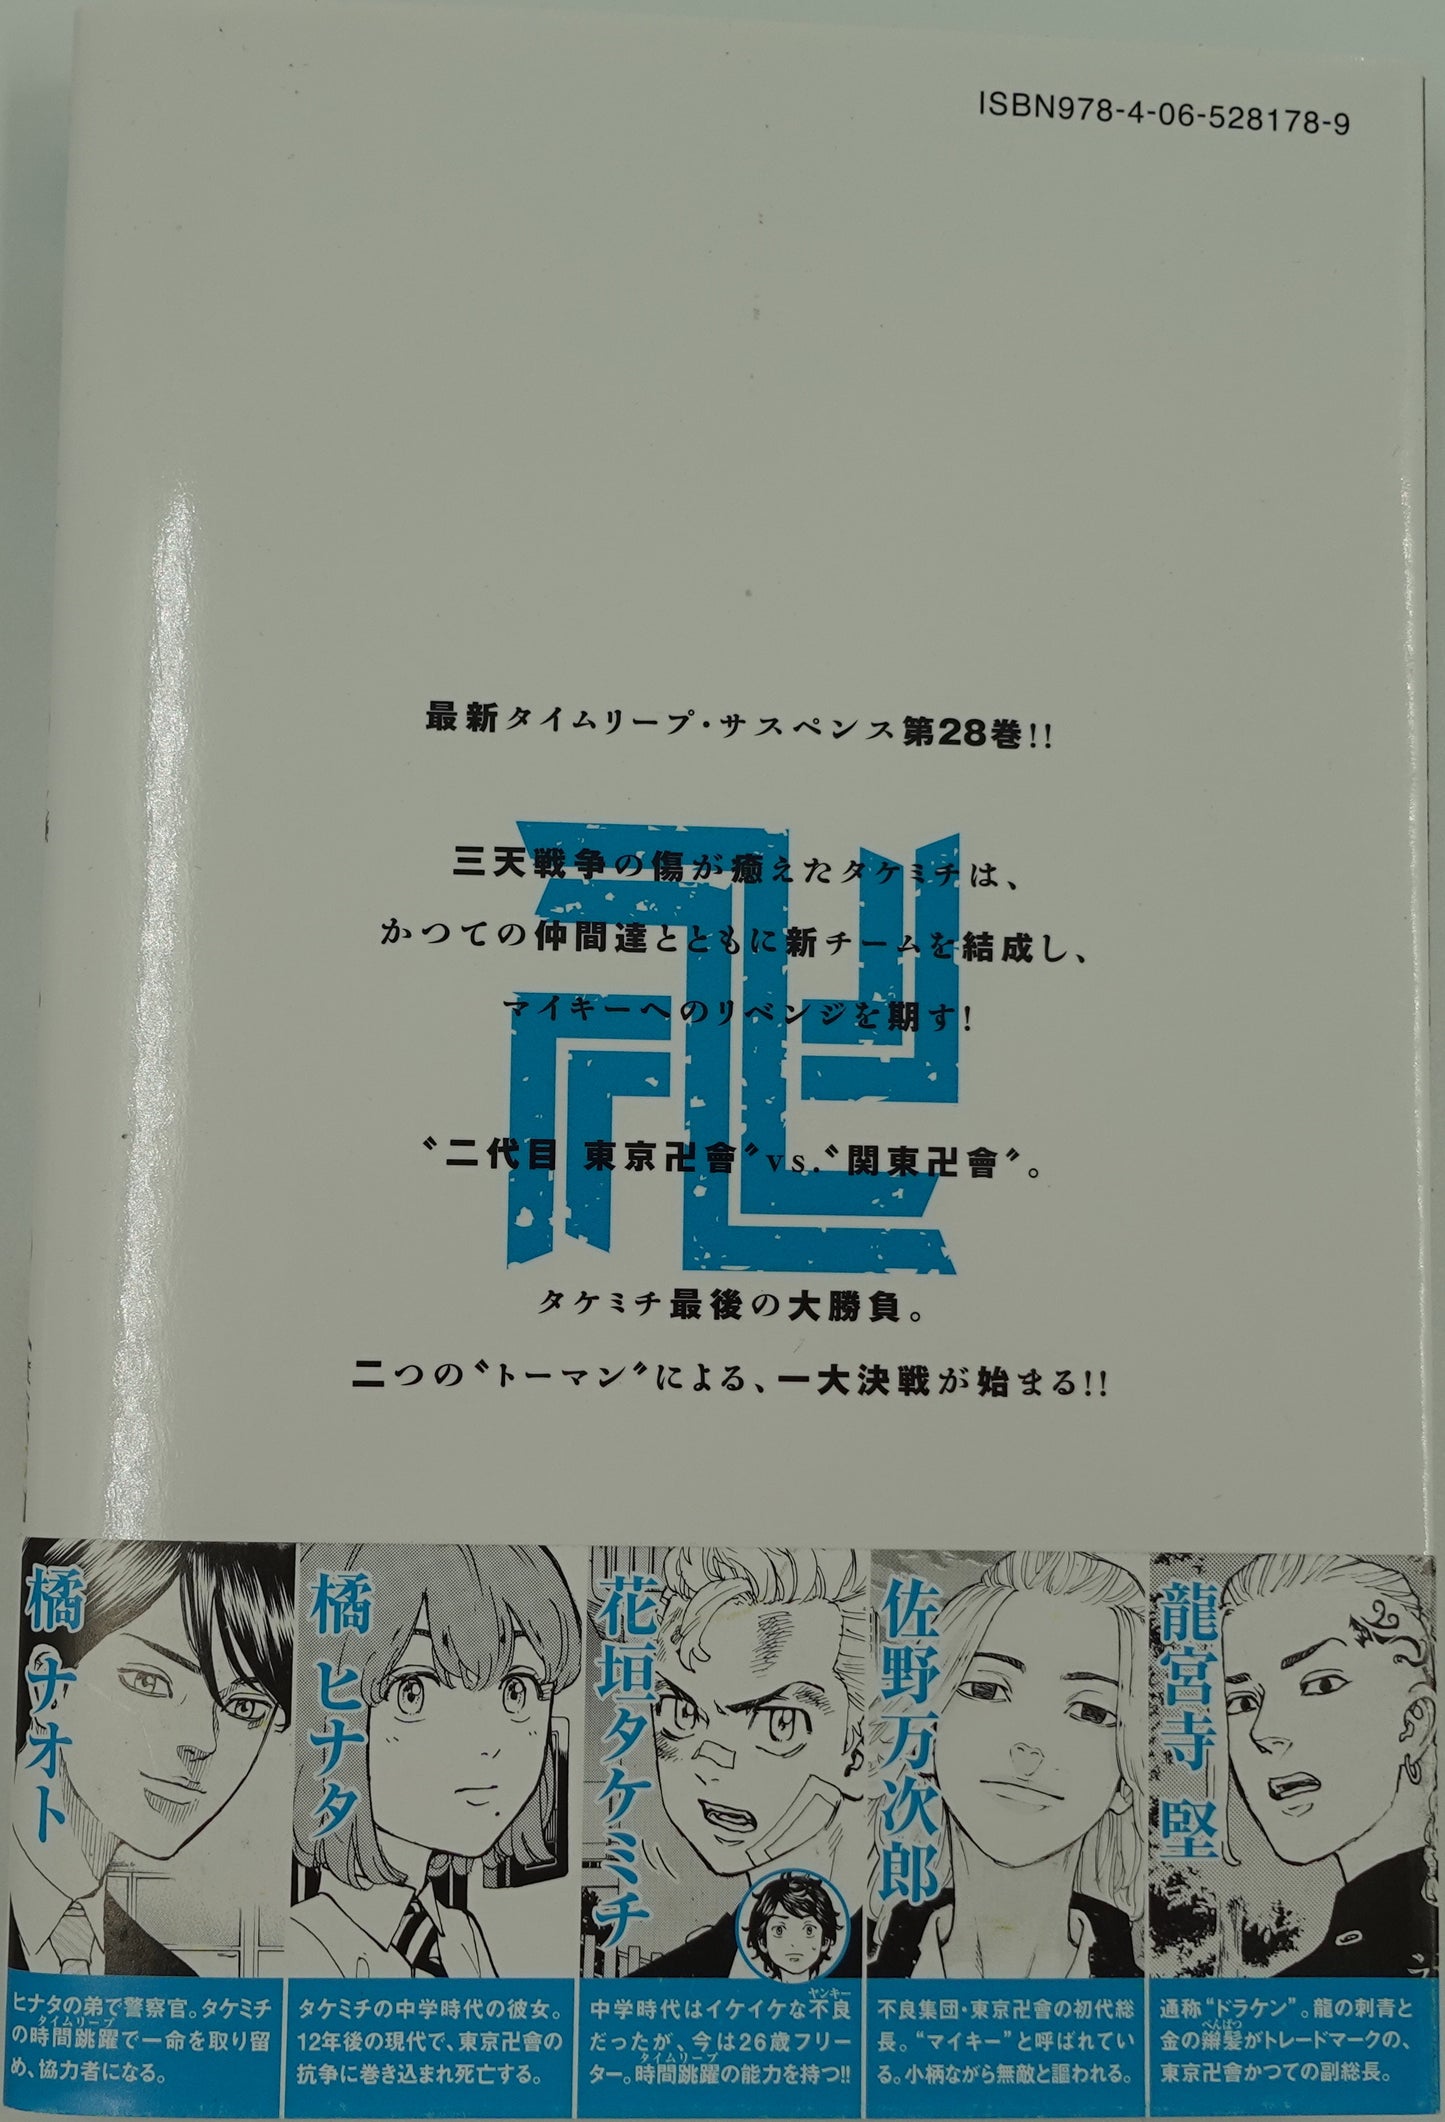 Tokyo Revengers Vol.28- Official Japanese Edition